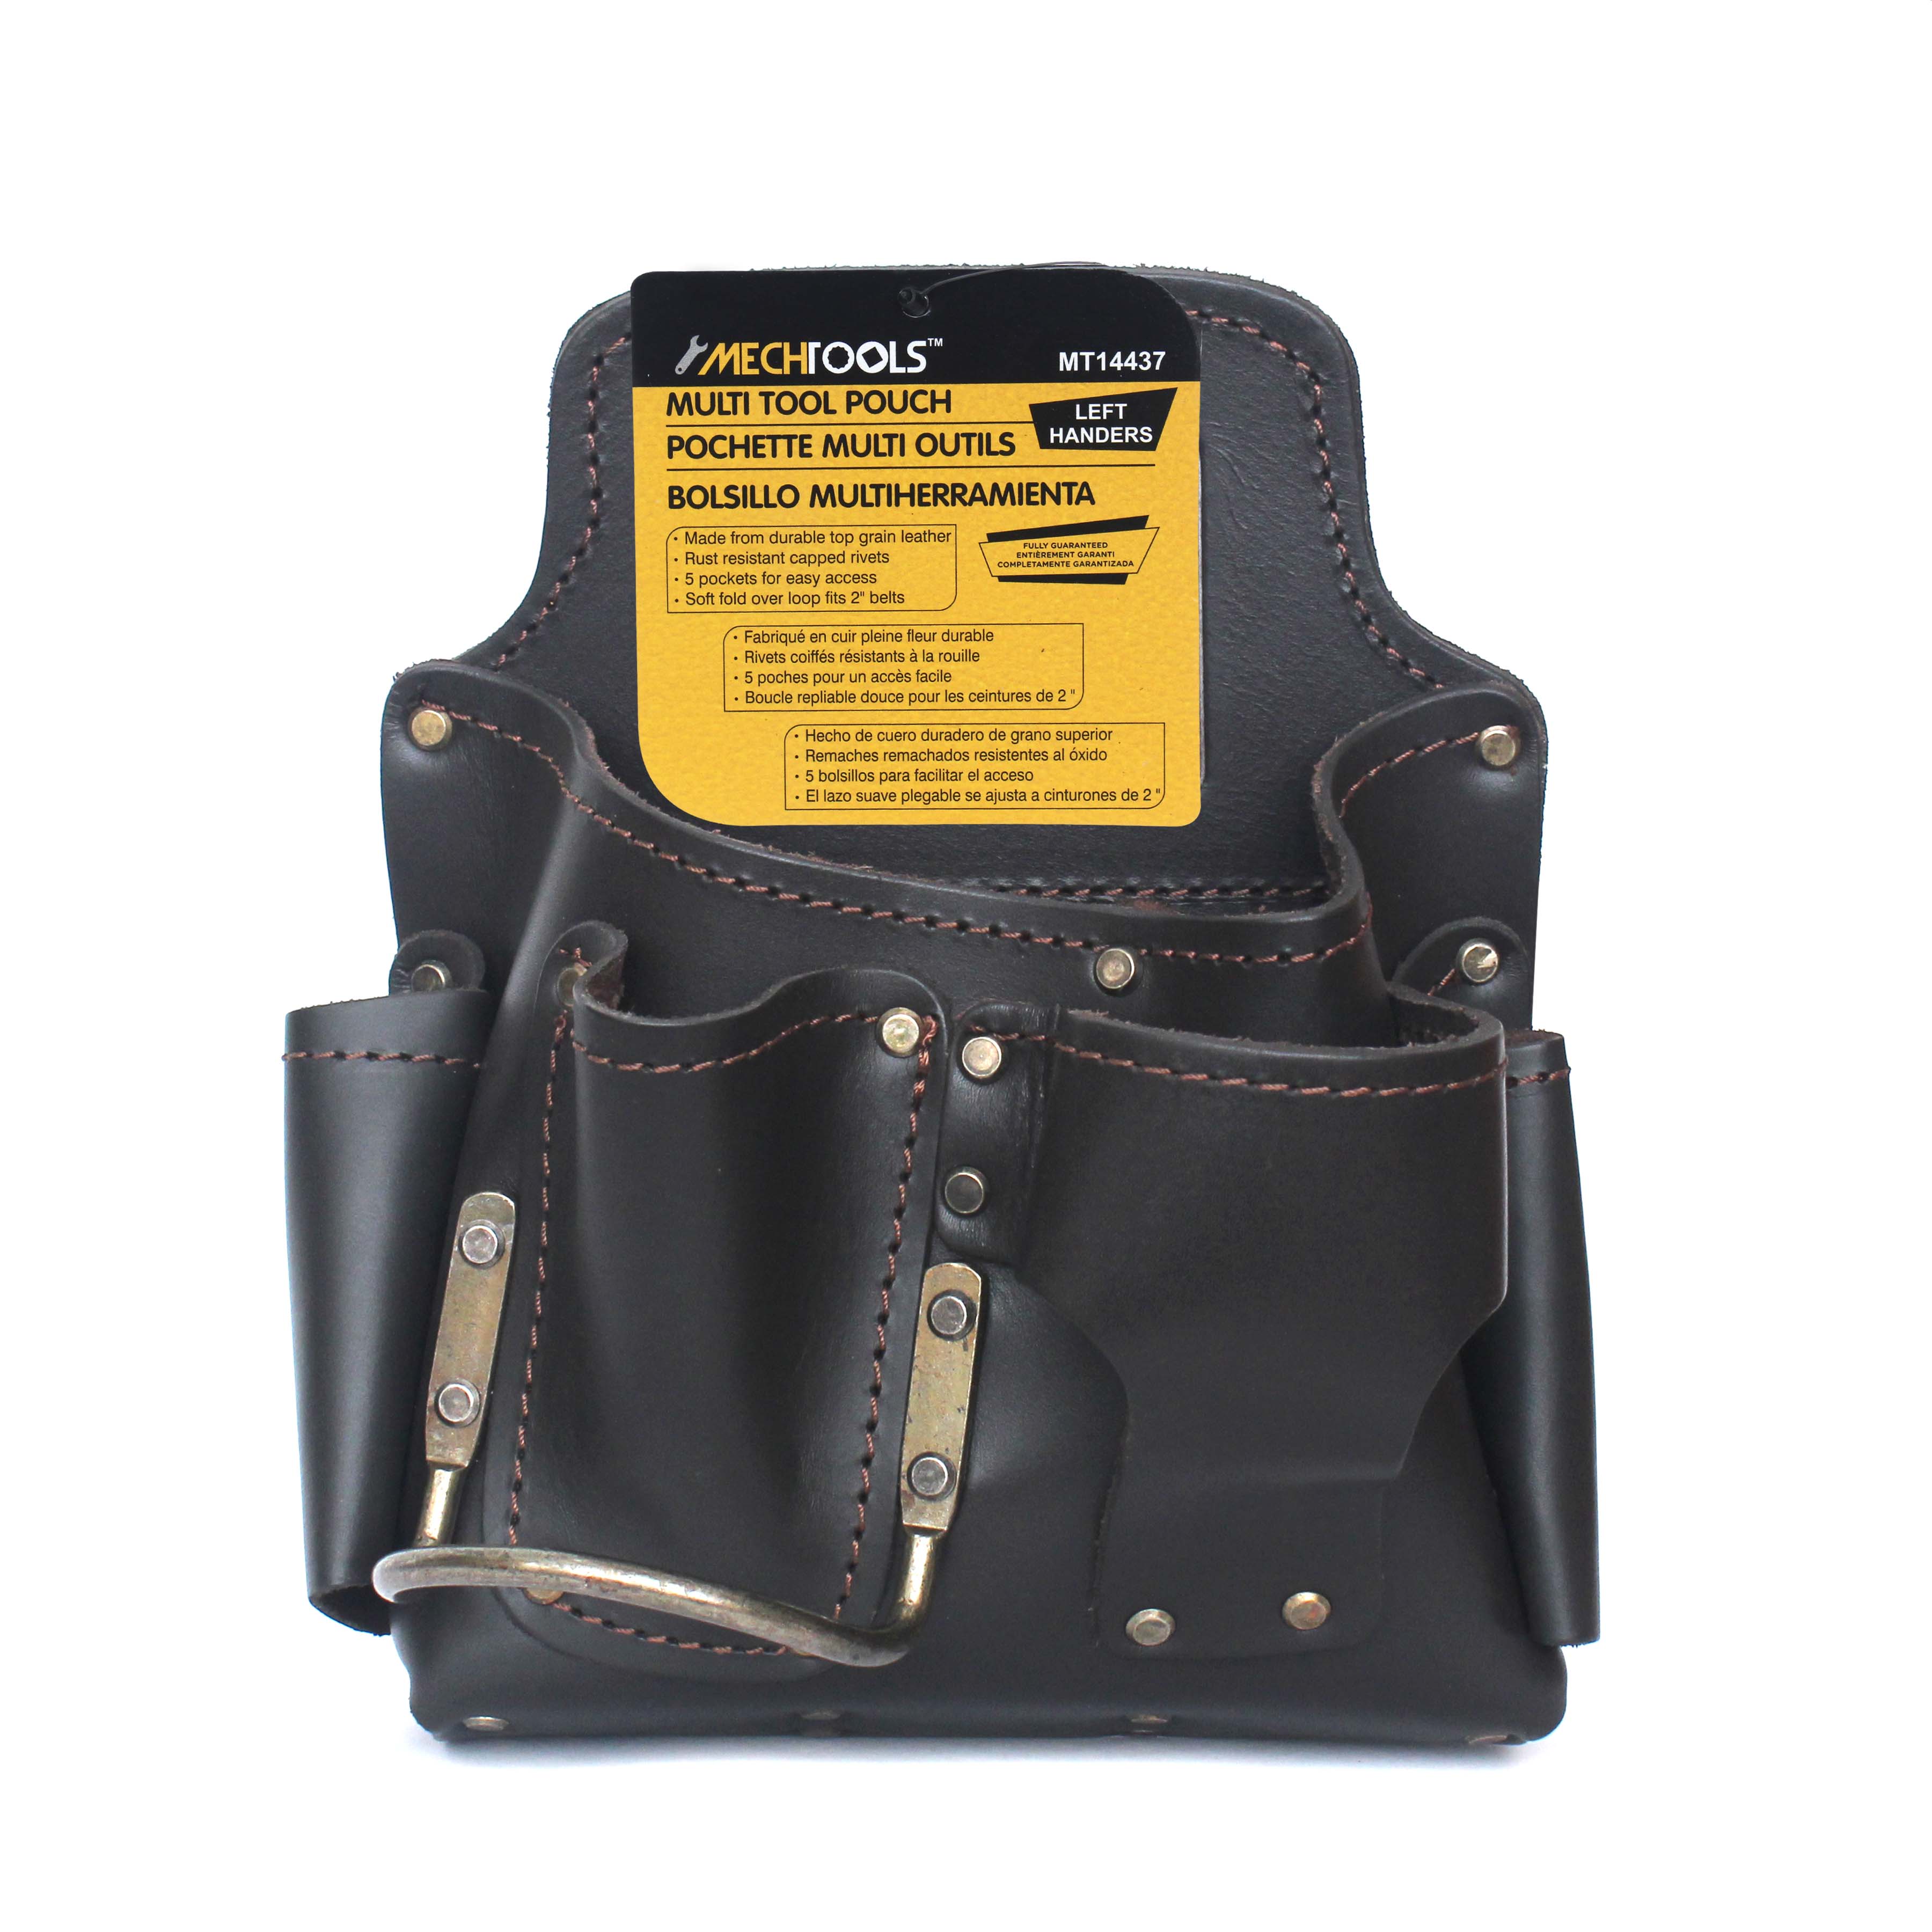 MULTI-TOOL POUCH FOR LEFT HANDERS